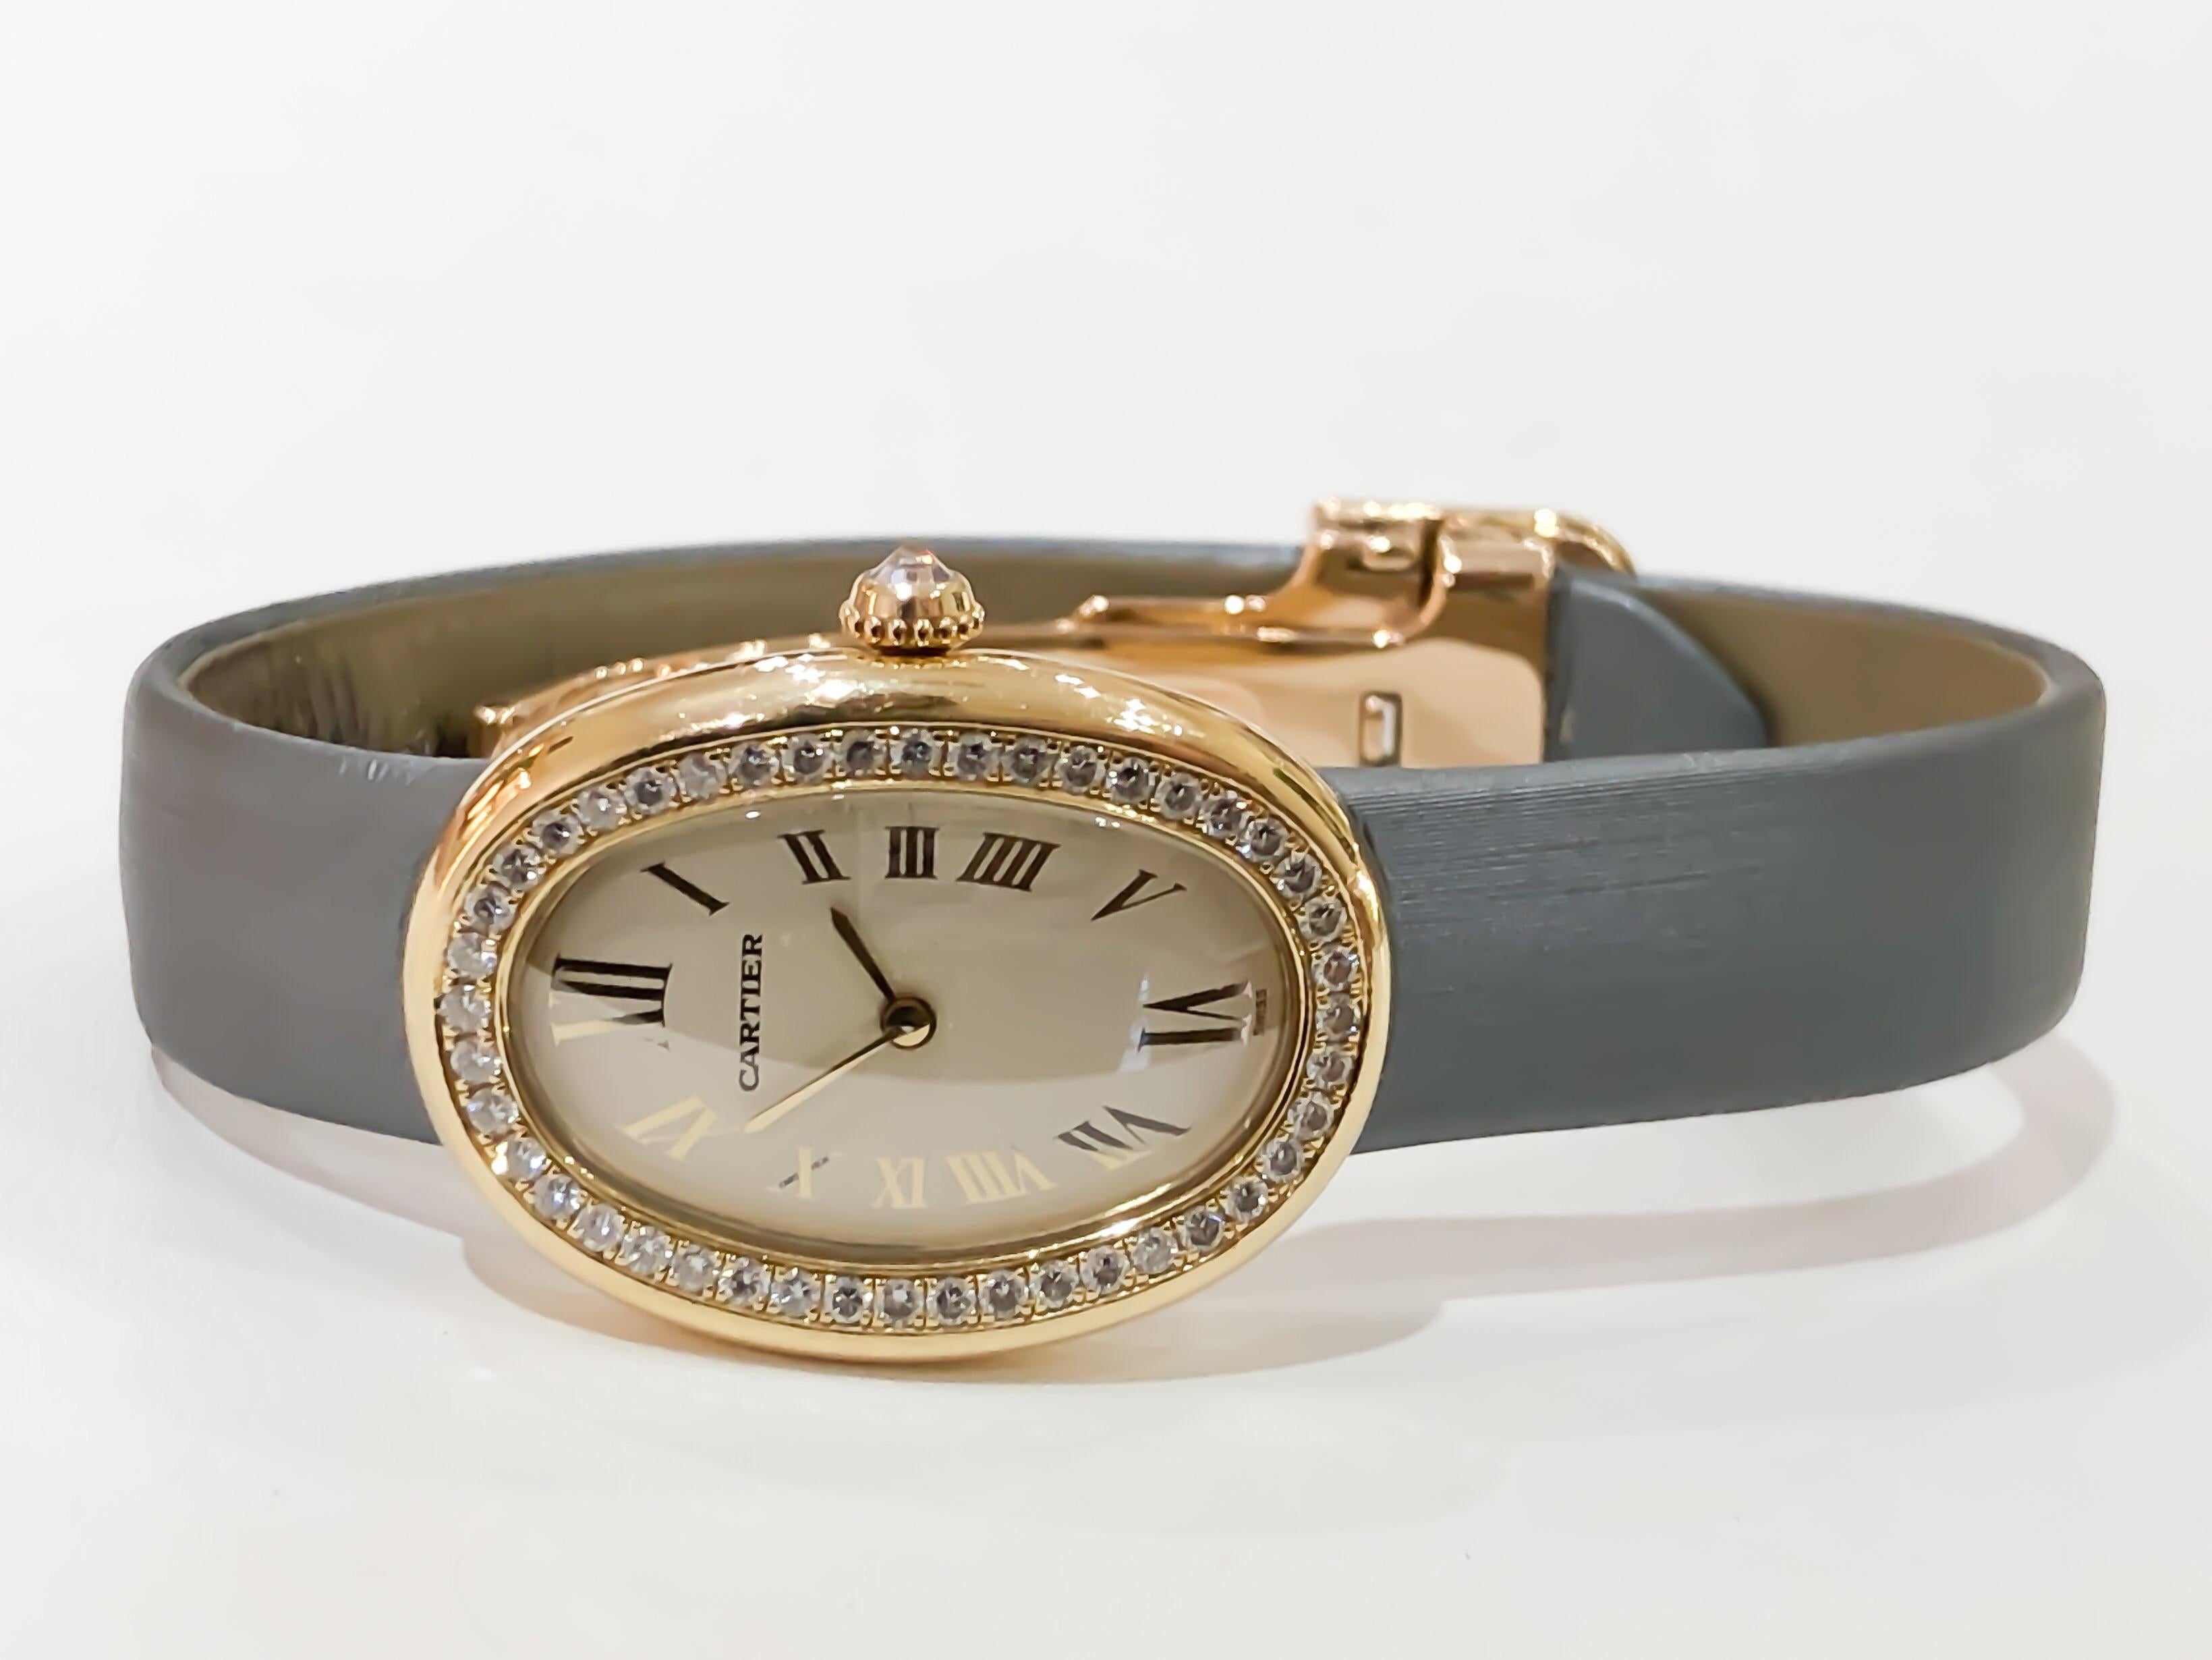 Cartier Baignoire designed in premium 18K yellow gold with a factory set diamond case and diamond crown. Elegant curved oval case that is perfect on the wrist. This is a special model, not in production, in excellent condition. 

Reference Number: